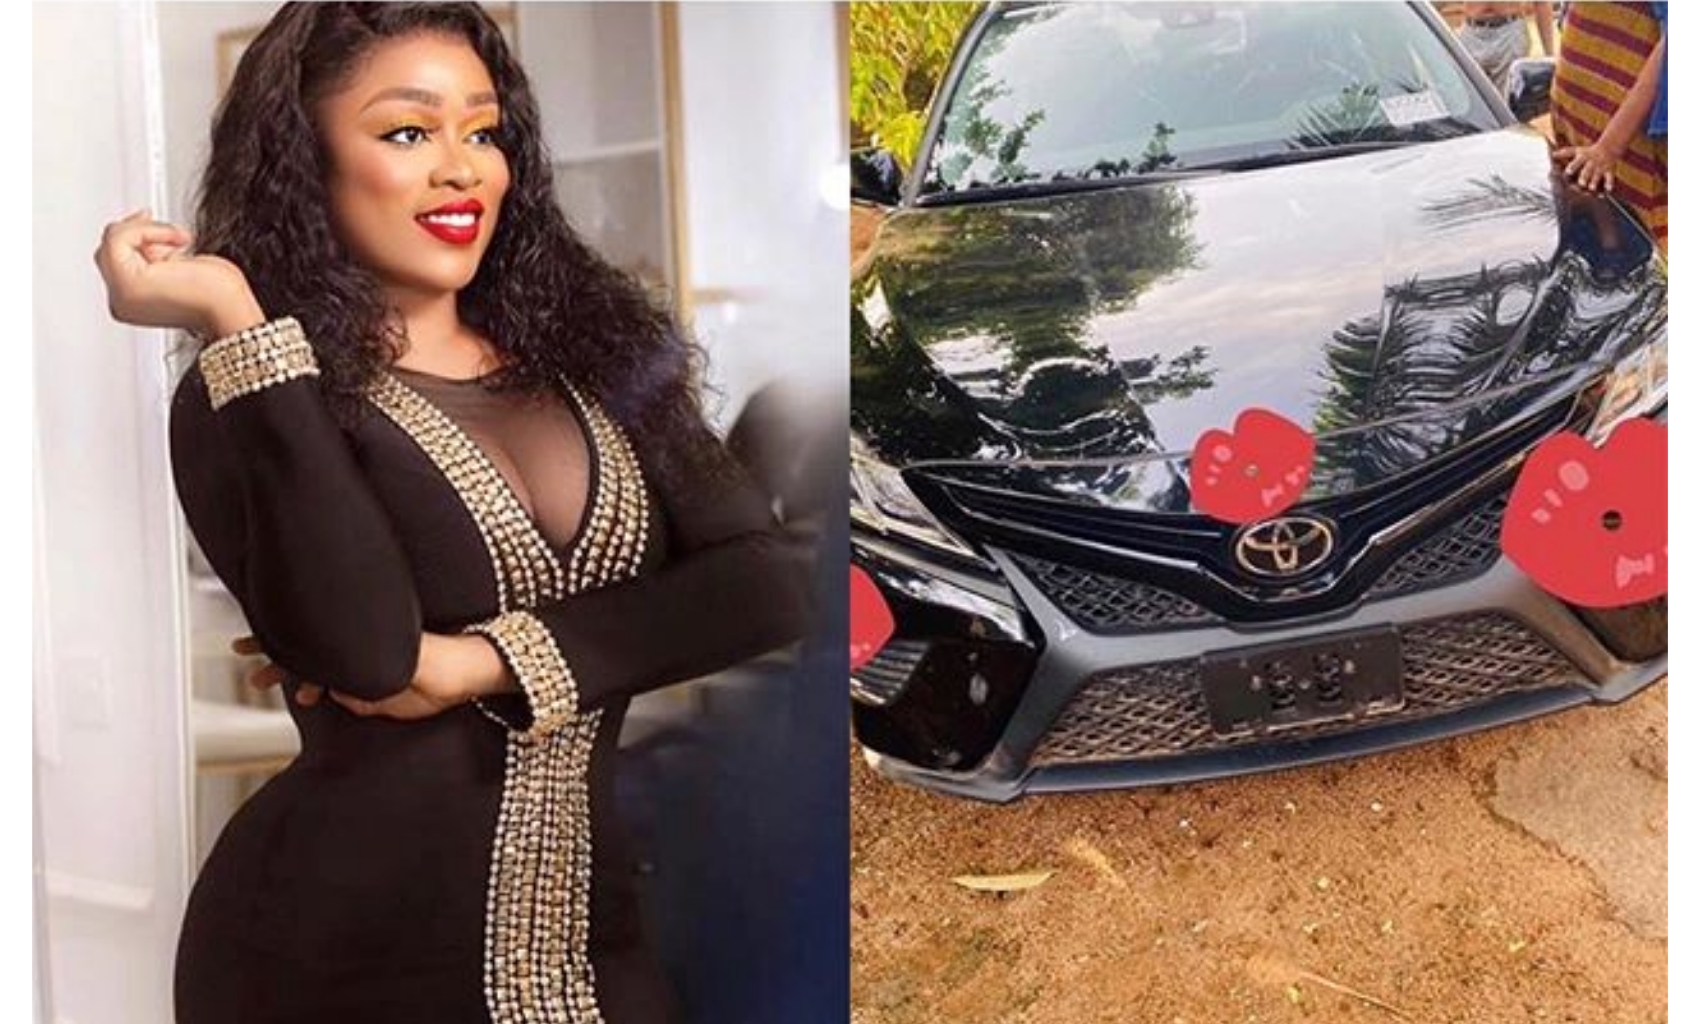 S*x enhancement product seller buys three cars, months after buying a house in Lekki (Photos)